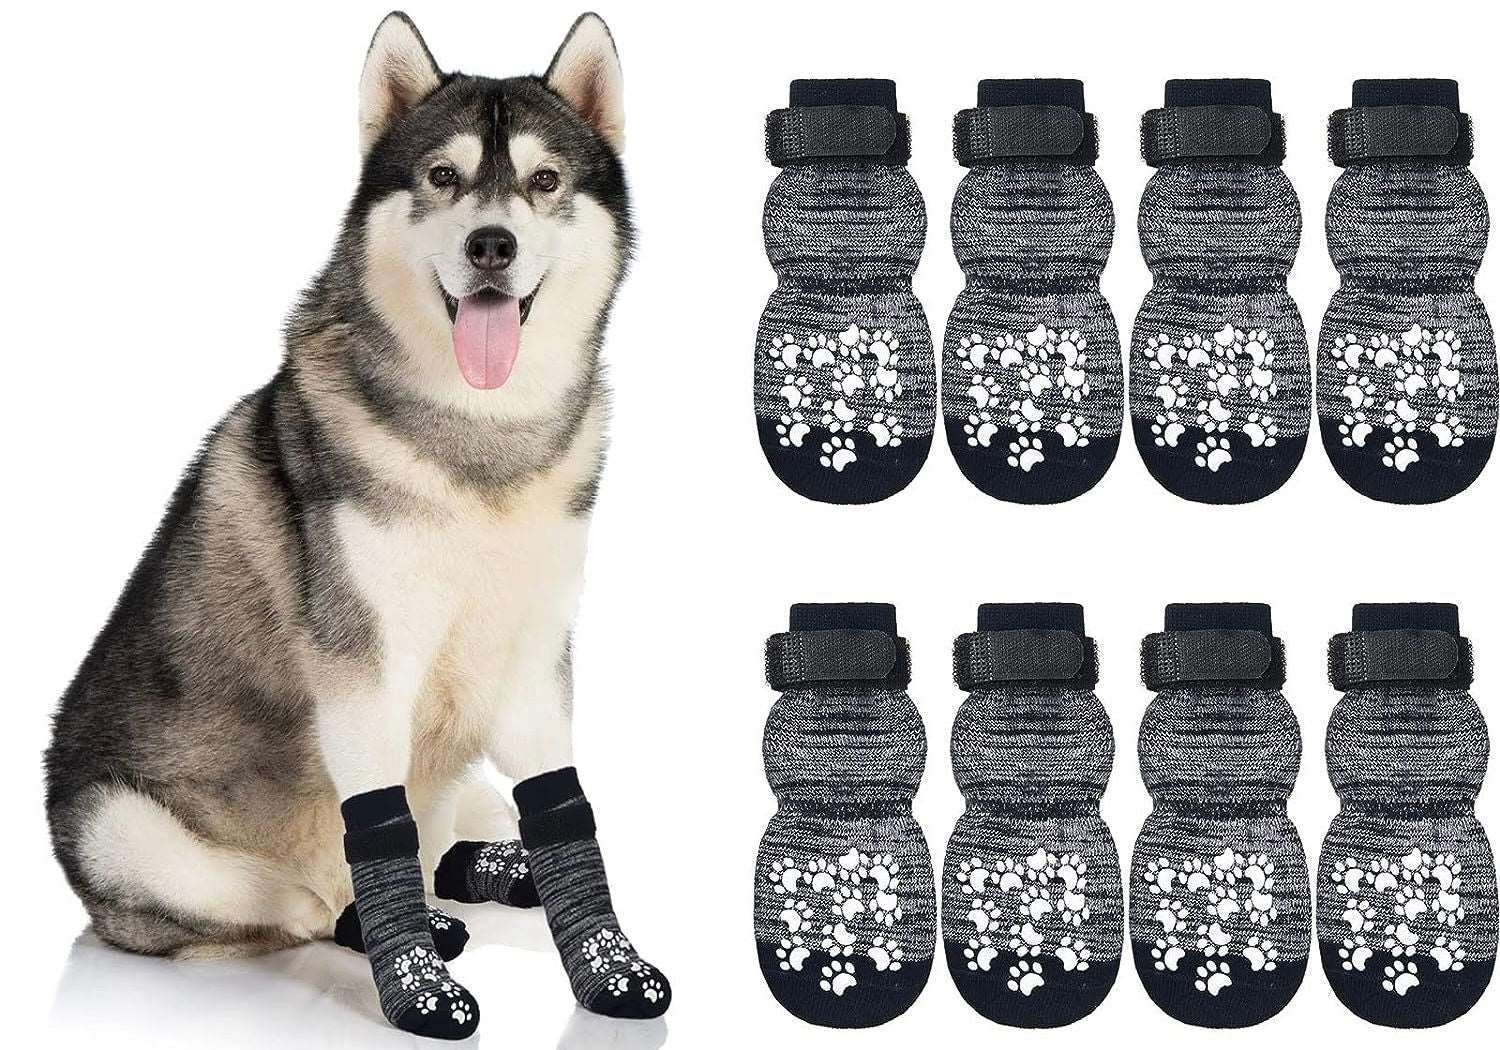 KUTKUT 8Pcs Double Side Anti-Slip Dog Socks with Adjustable Straps - Warm Strong Traction Control for Indoor on Hardwood Floor Wear Soft and Comfortable Paw Protector for Medium Large Dogs-Socks-kutkutstyle